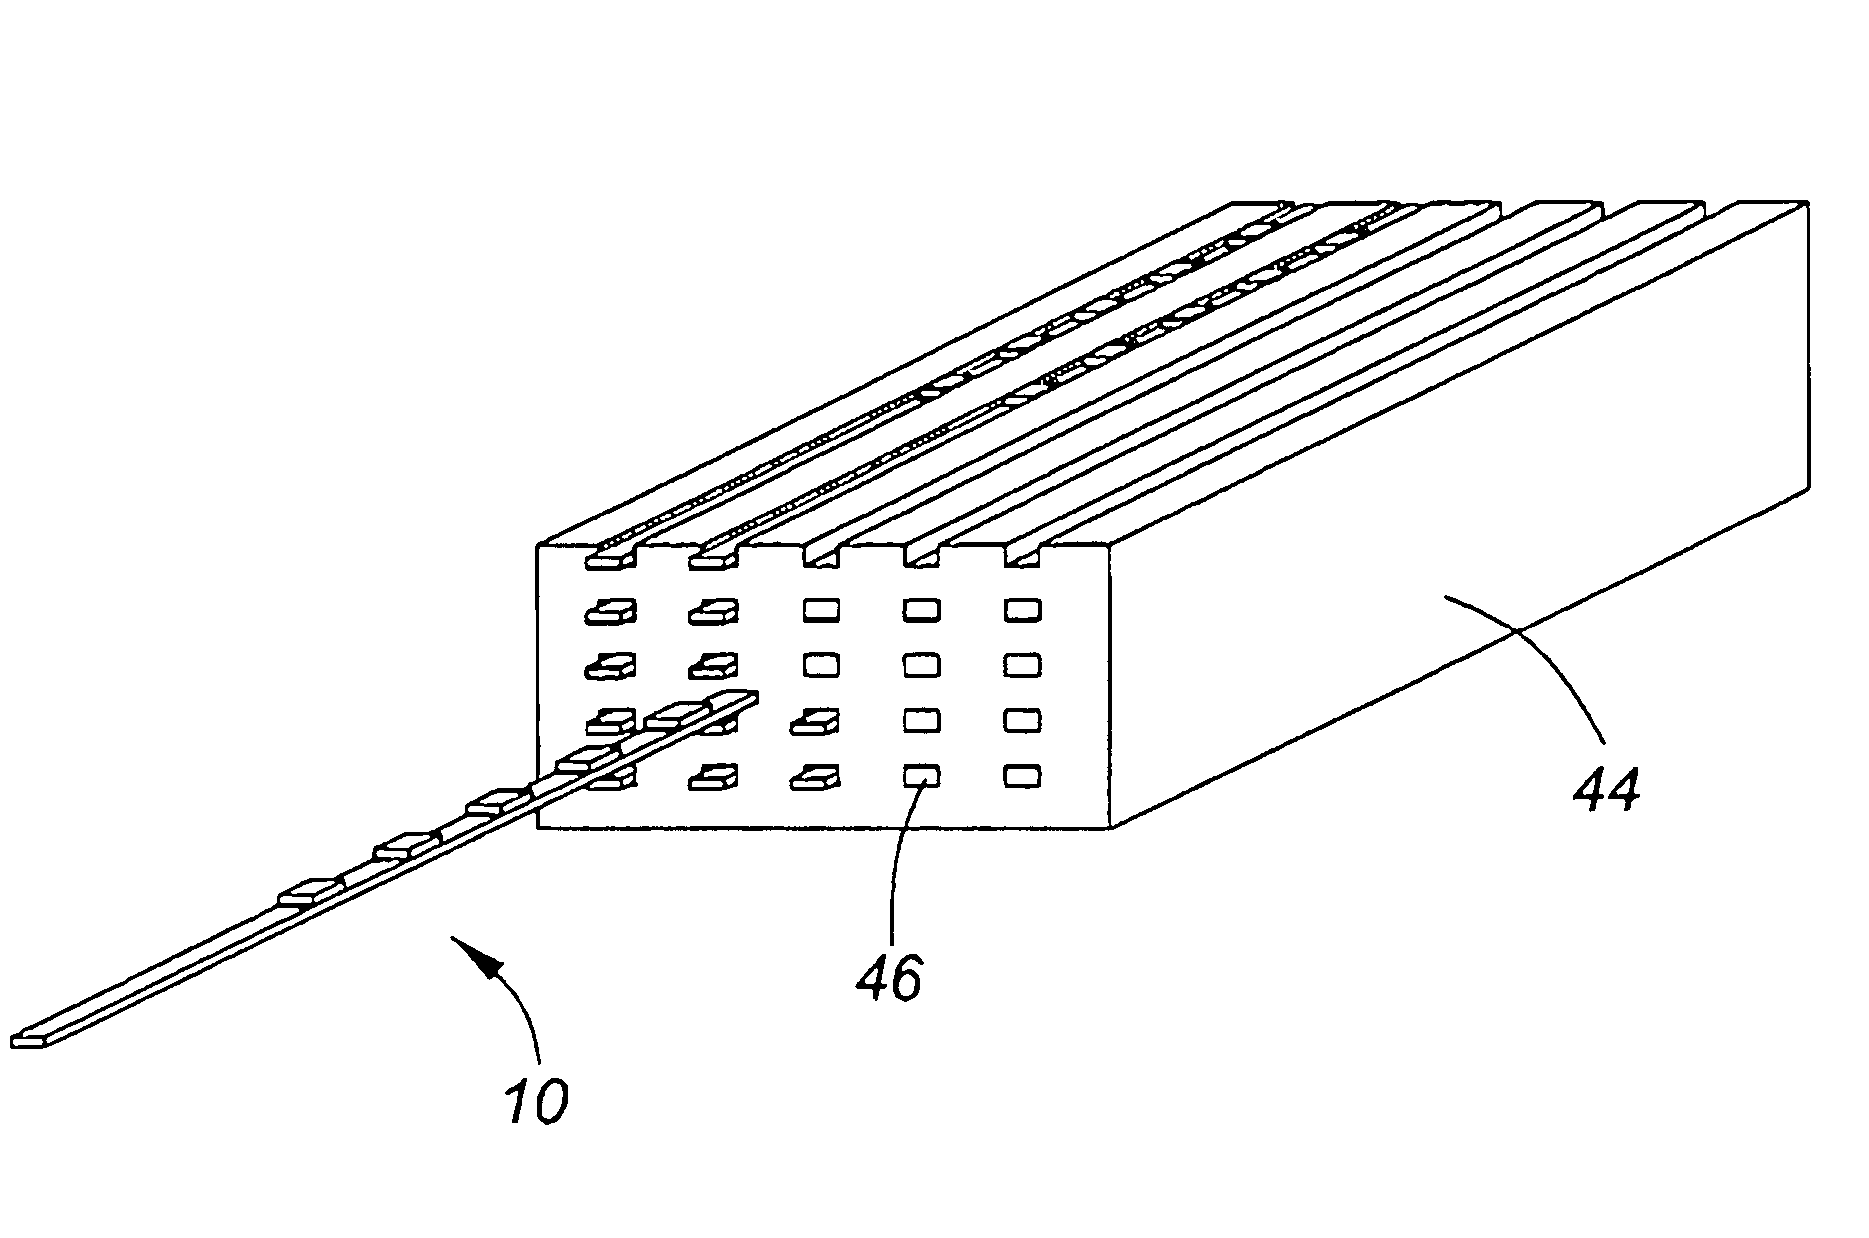 Dosimeter having an array of sensors for measuring ionizing radiation, and dosimetry system and method using such a dosimeter